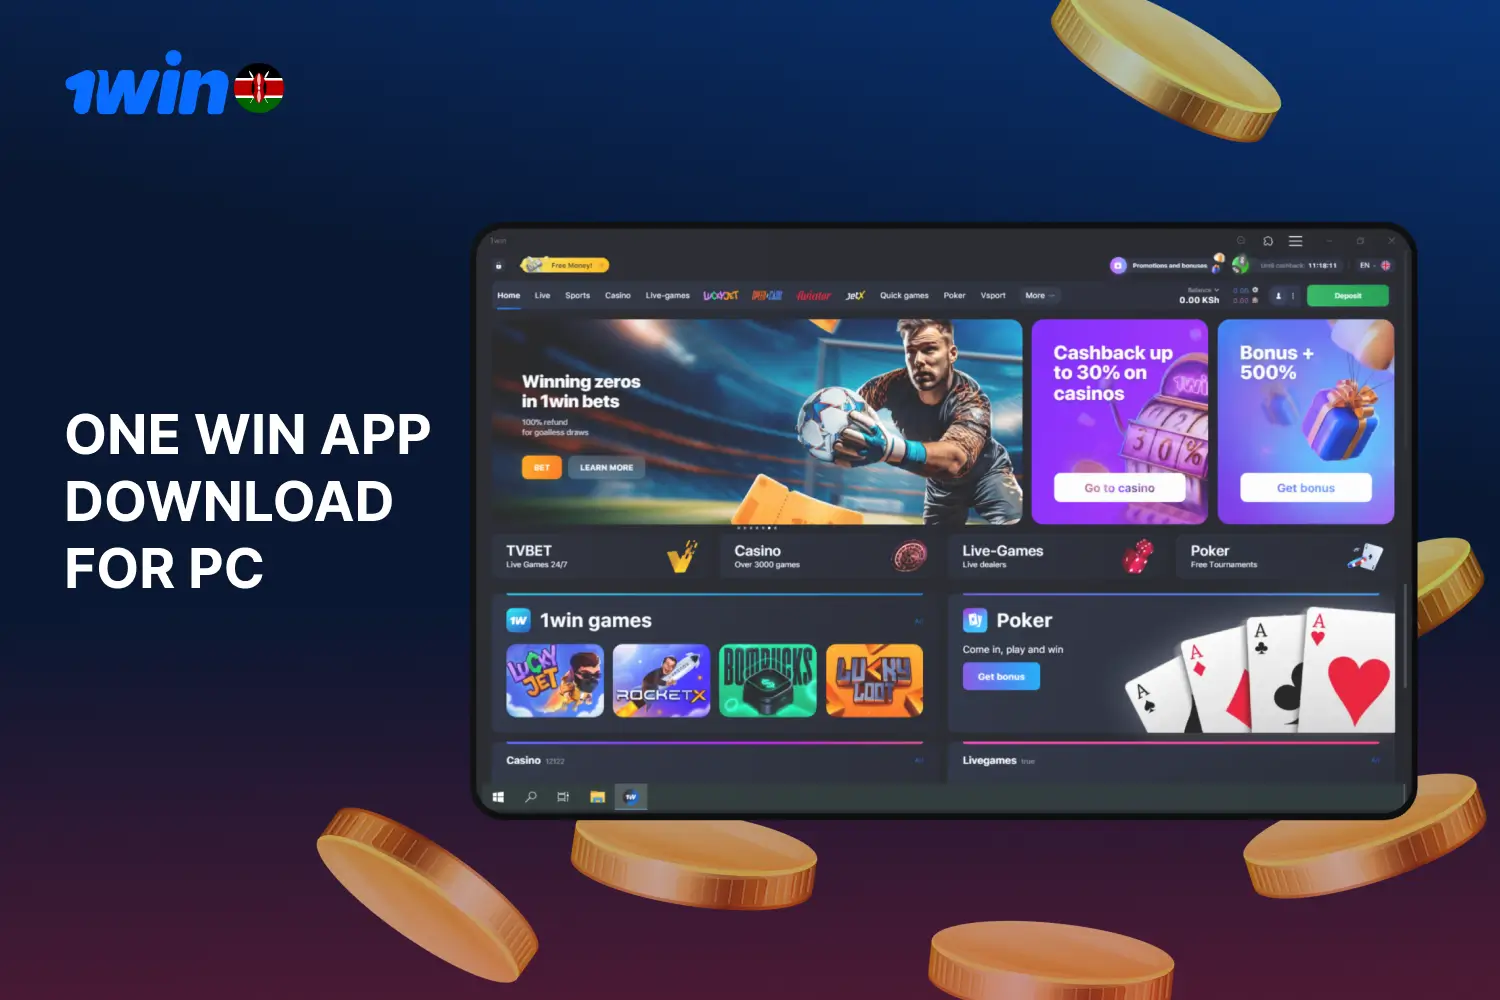 Players in Kenya can download the 1win app for PC